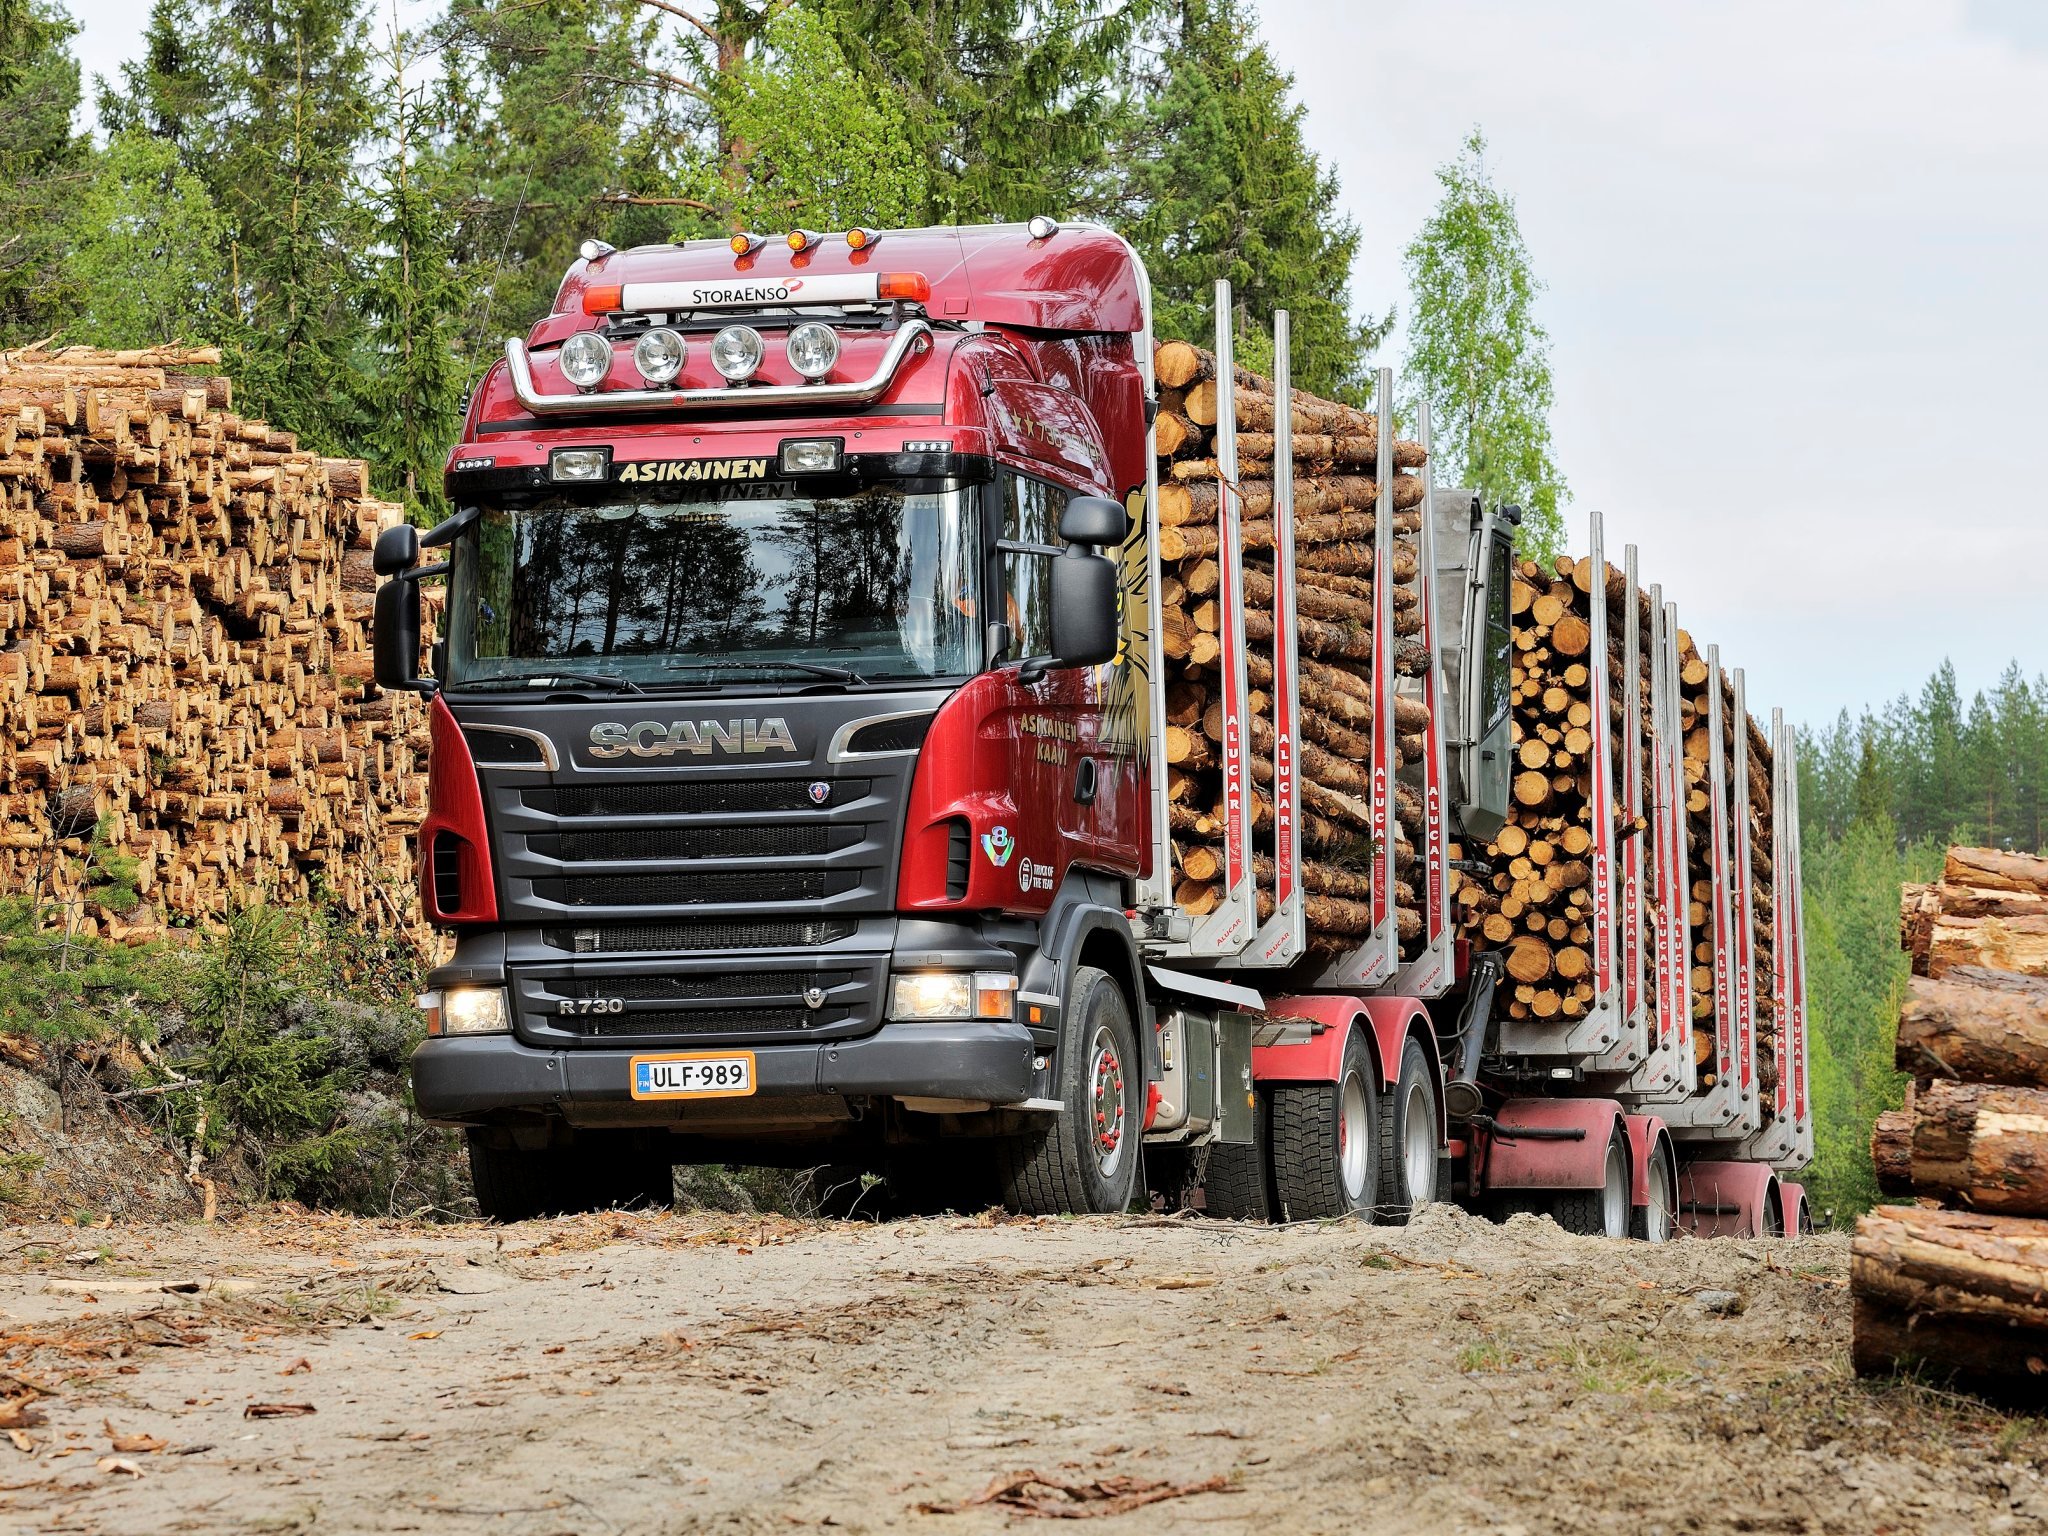 2010 13, Scania, R730, 6x4, Highline, Timber, Truck, Semi, Tractor Wallpaper